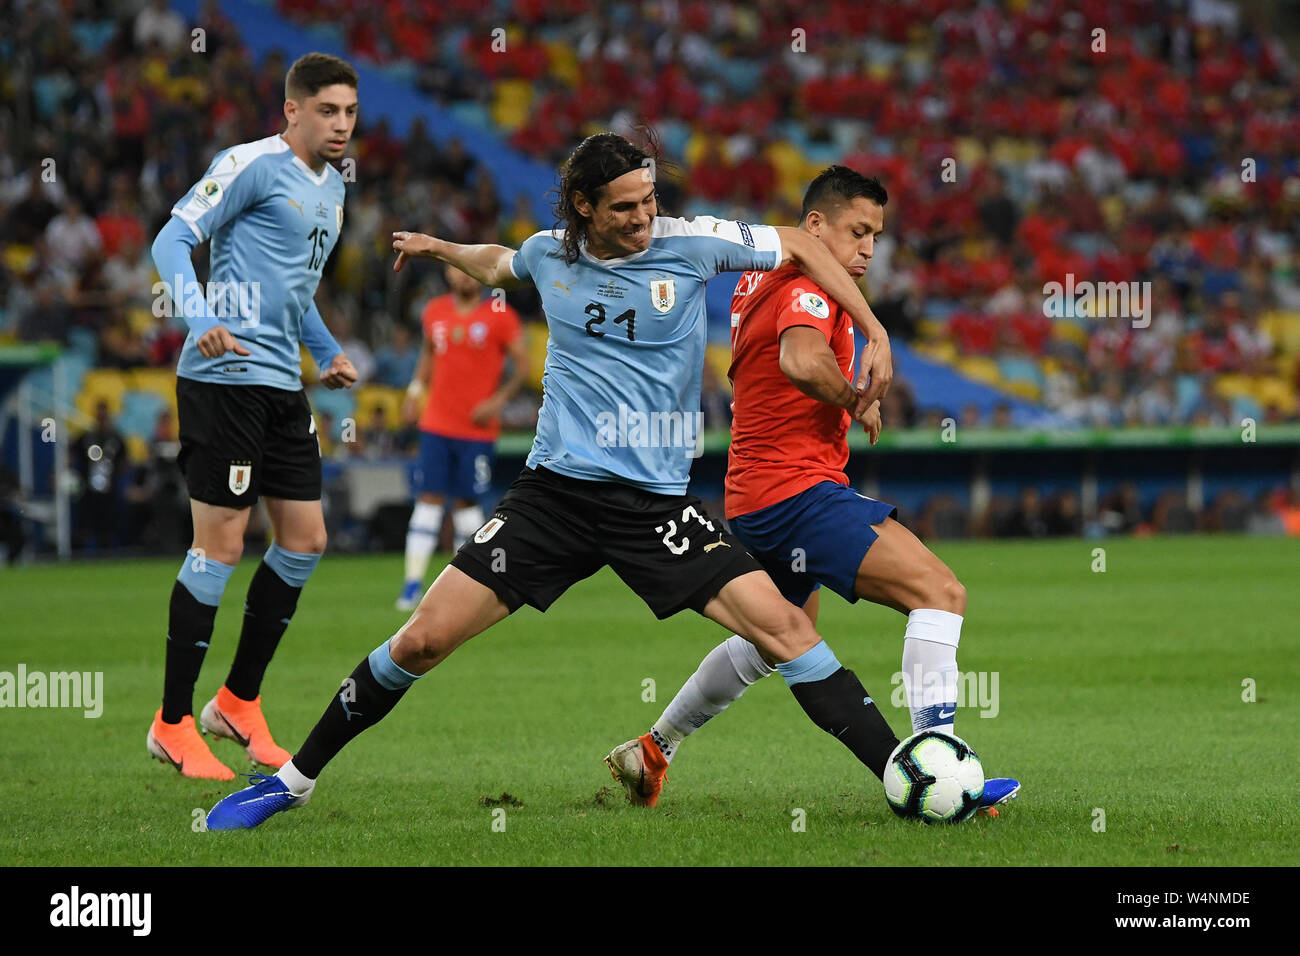 Uruguayan soccer player Cavani, during the Chile vs Uruguay game for the Copa América 2019 at the Maracanã stadium. Stock Photo